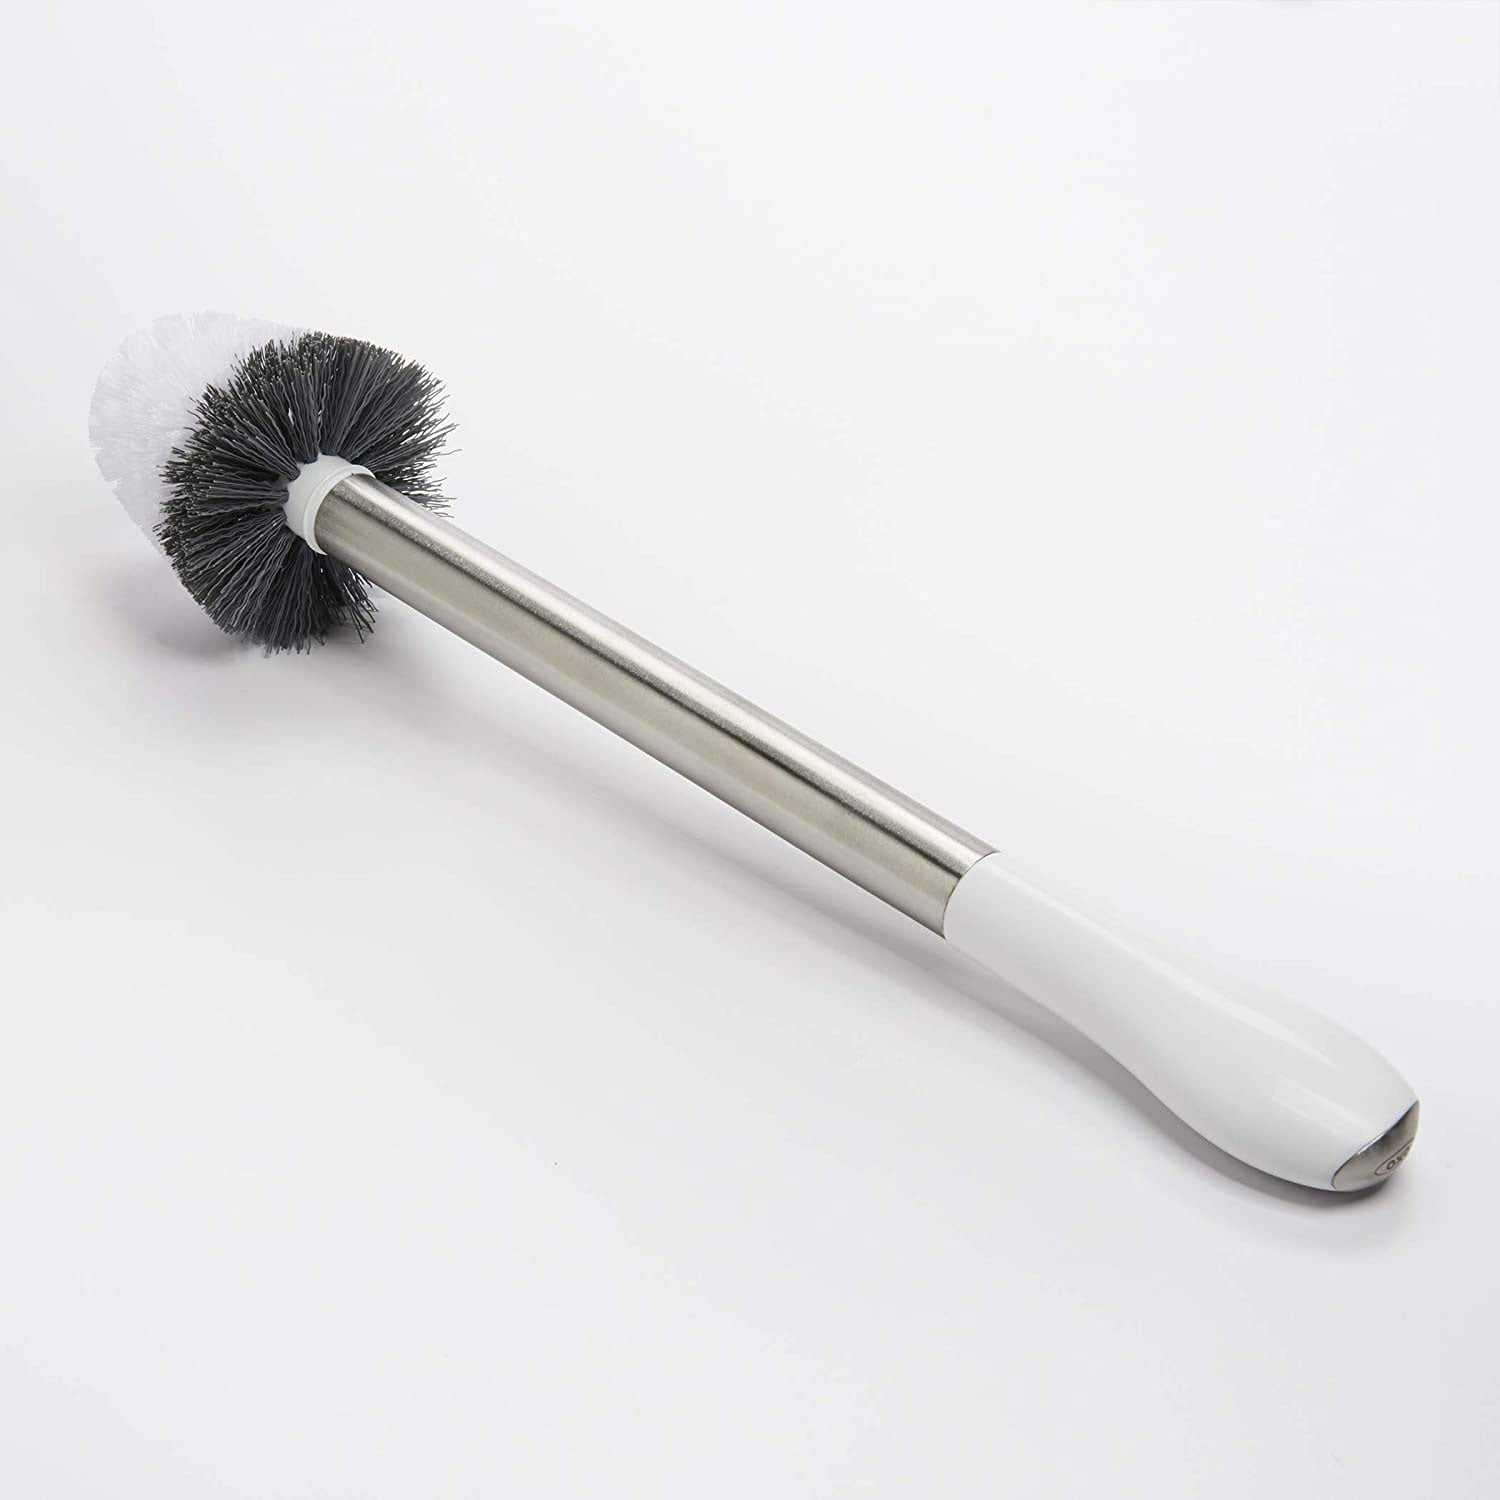 Oxo Good Grips Toilet Brush Replacement Head 1043632 (O1)